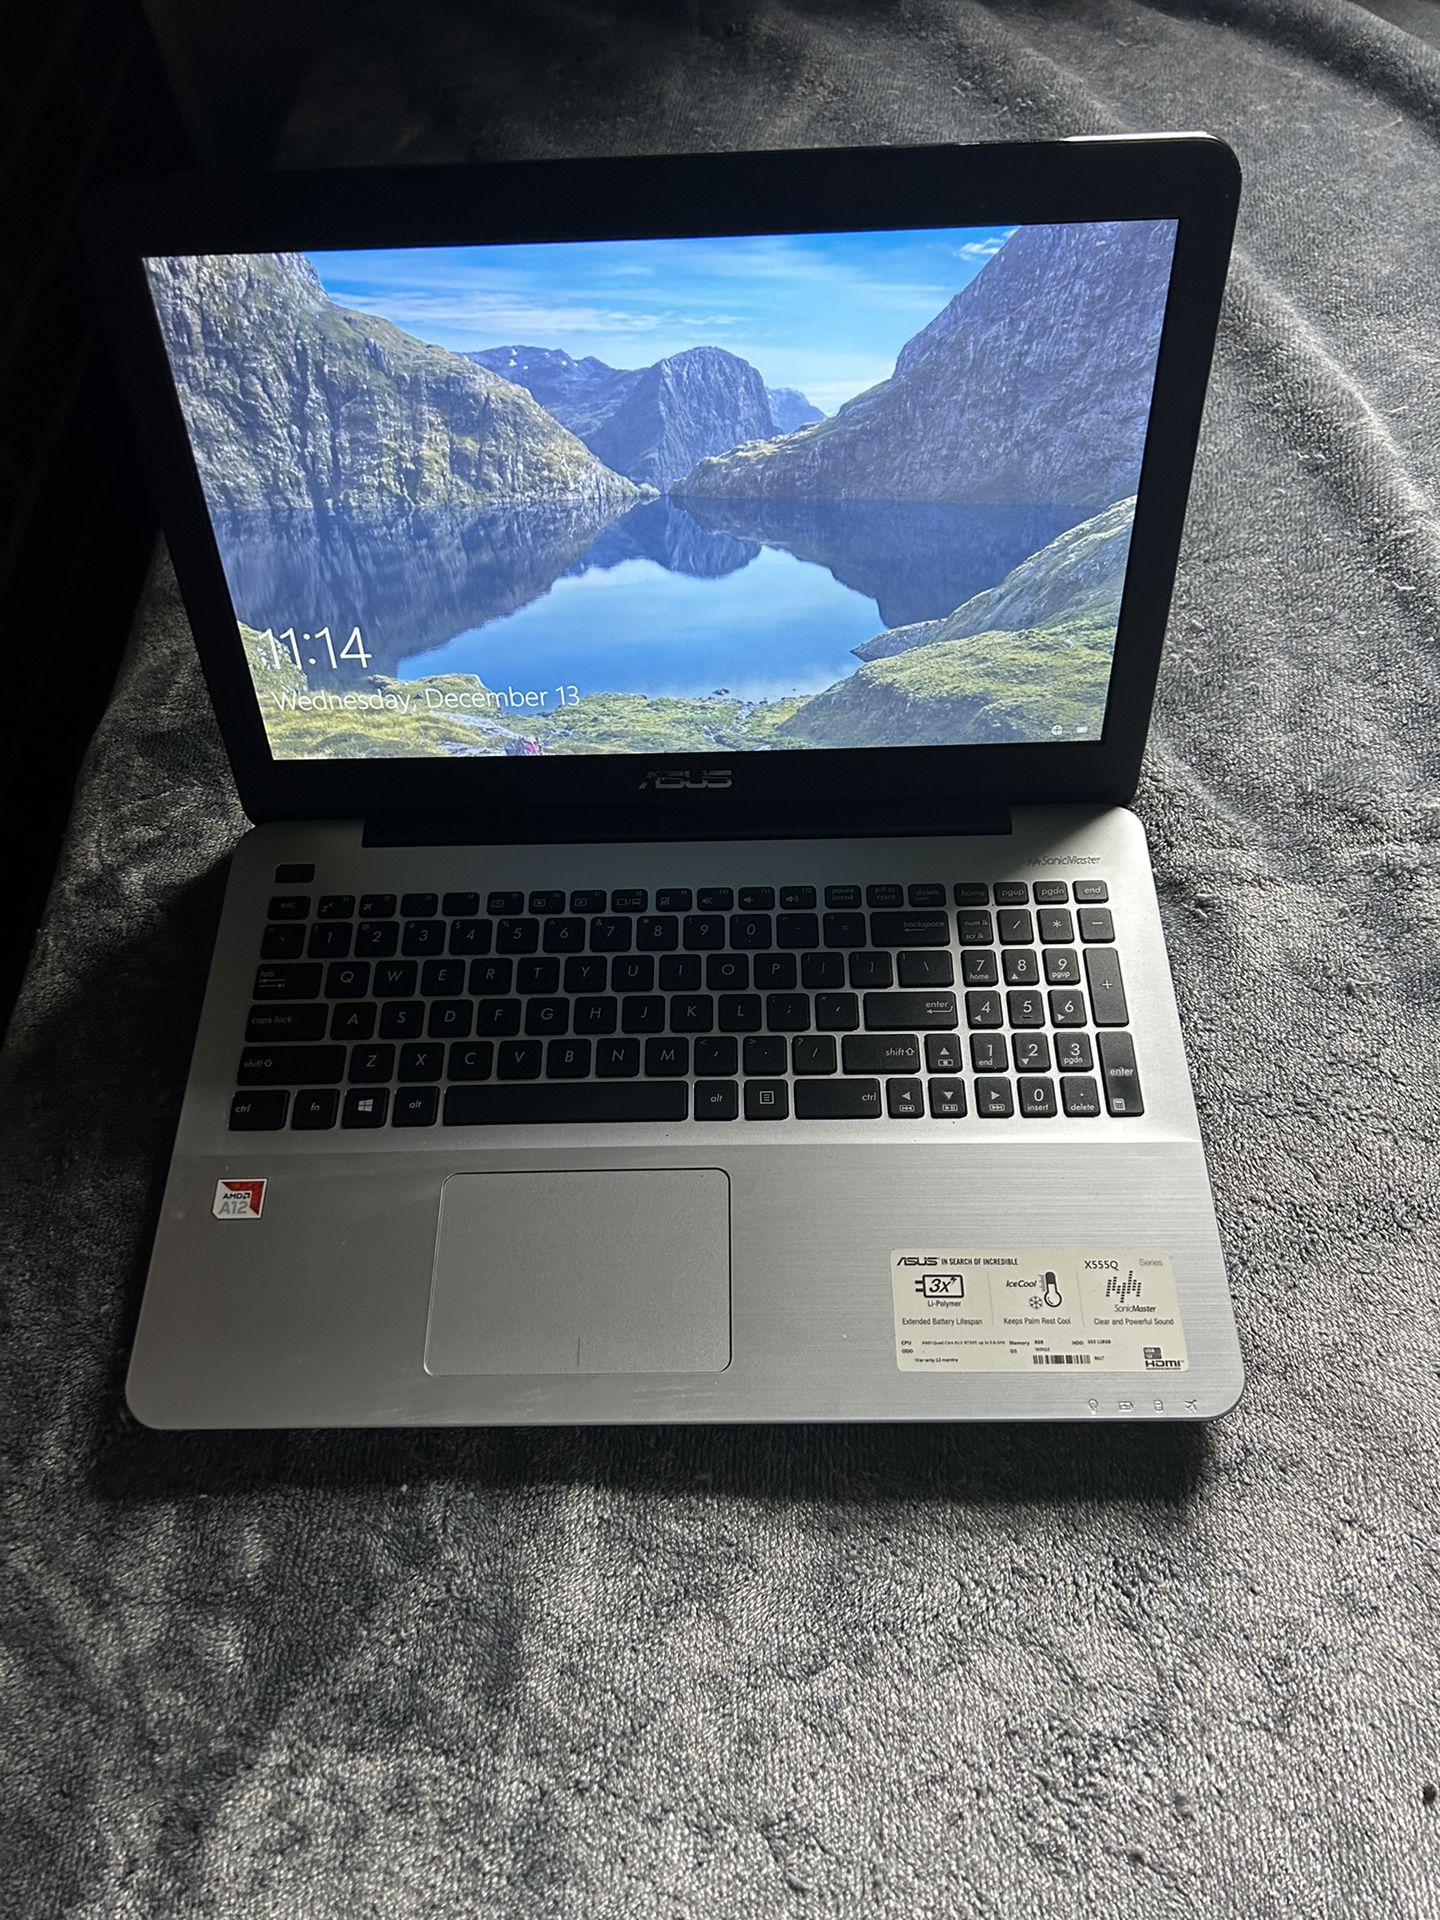 Asus Laptop With Installed Additional 18 Gb